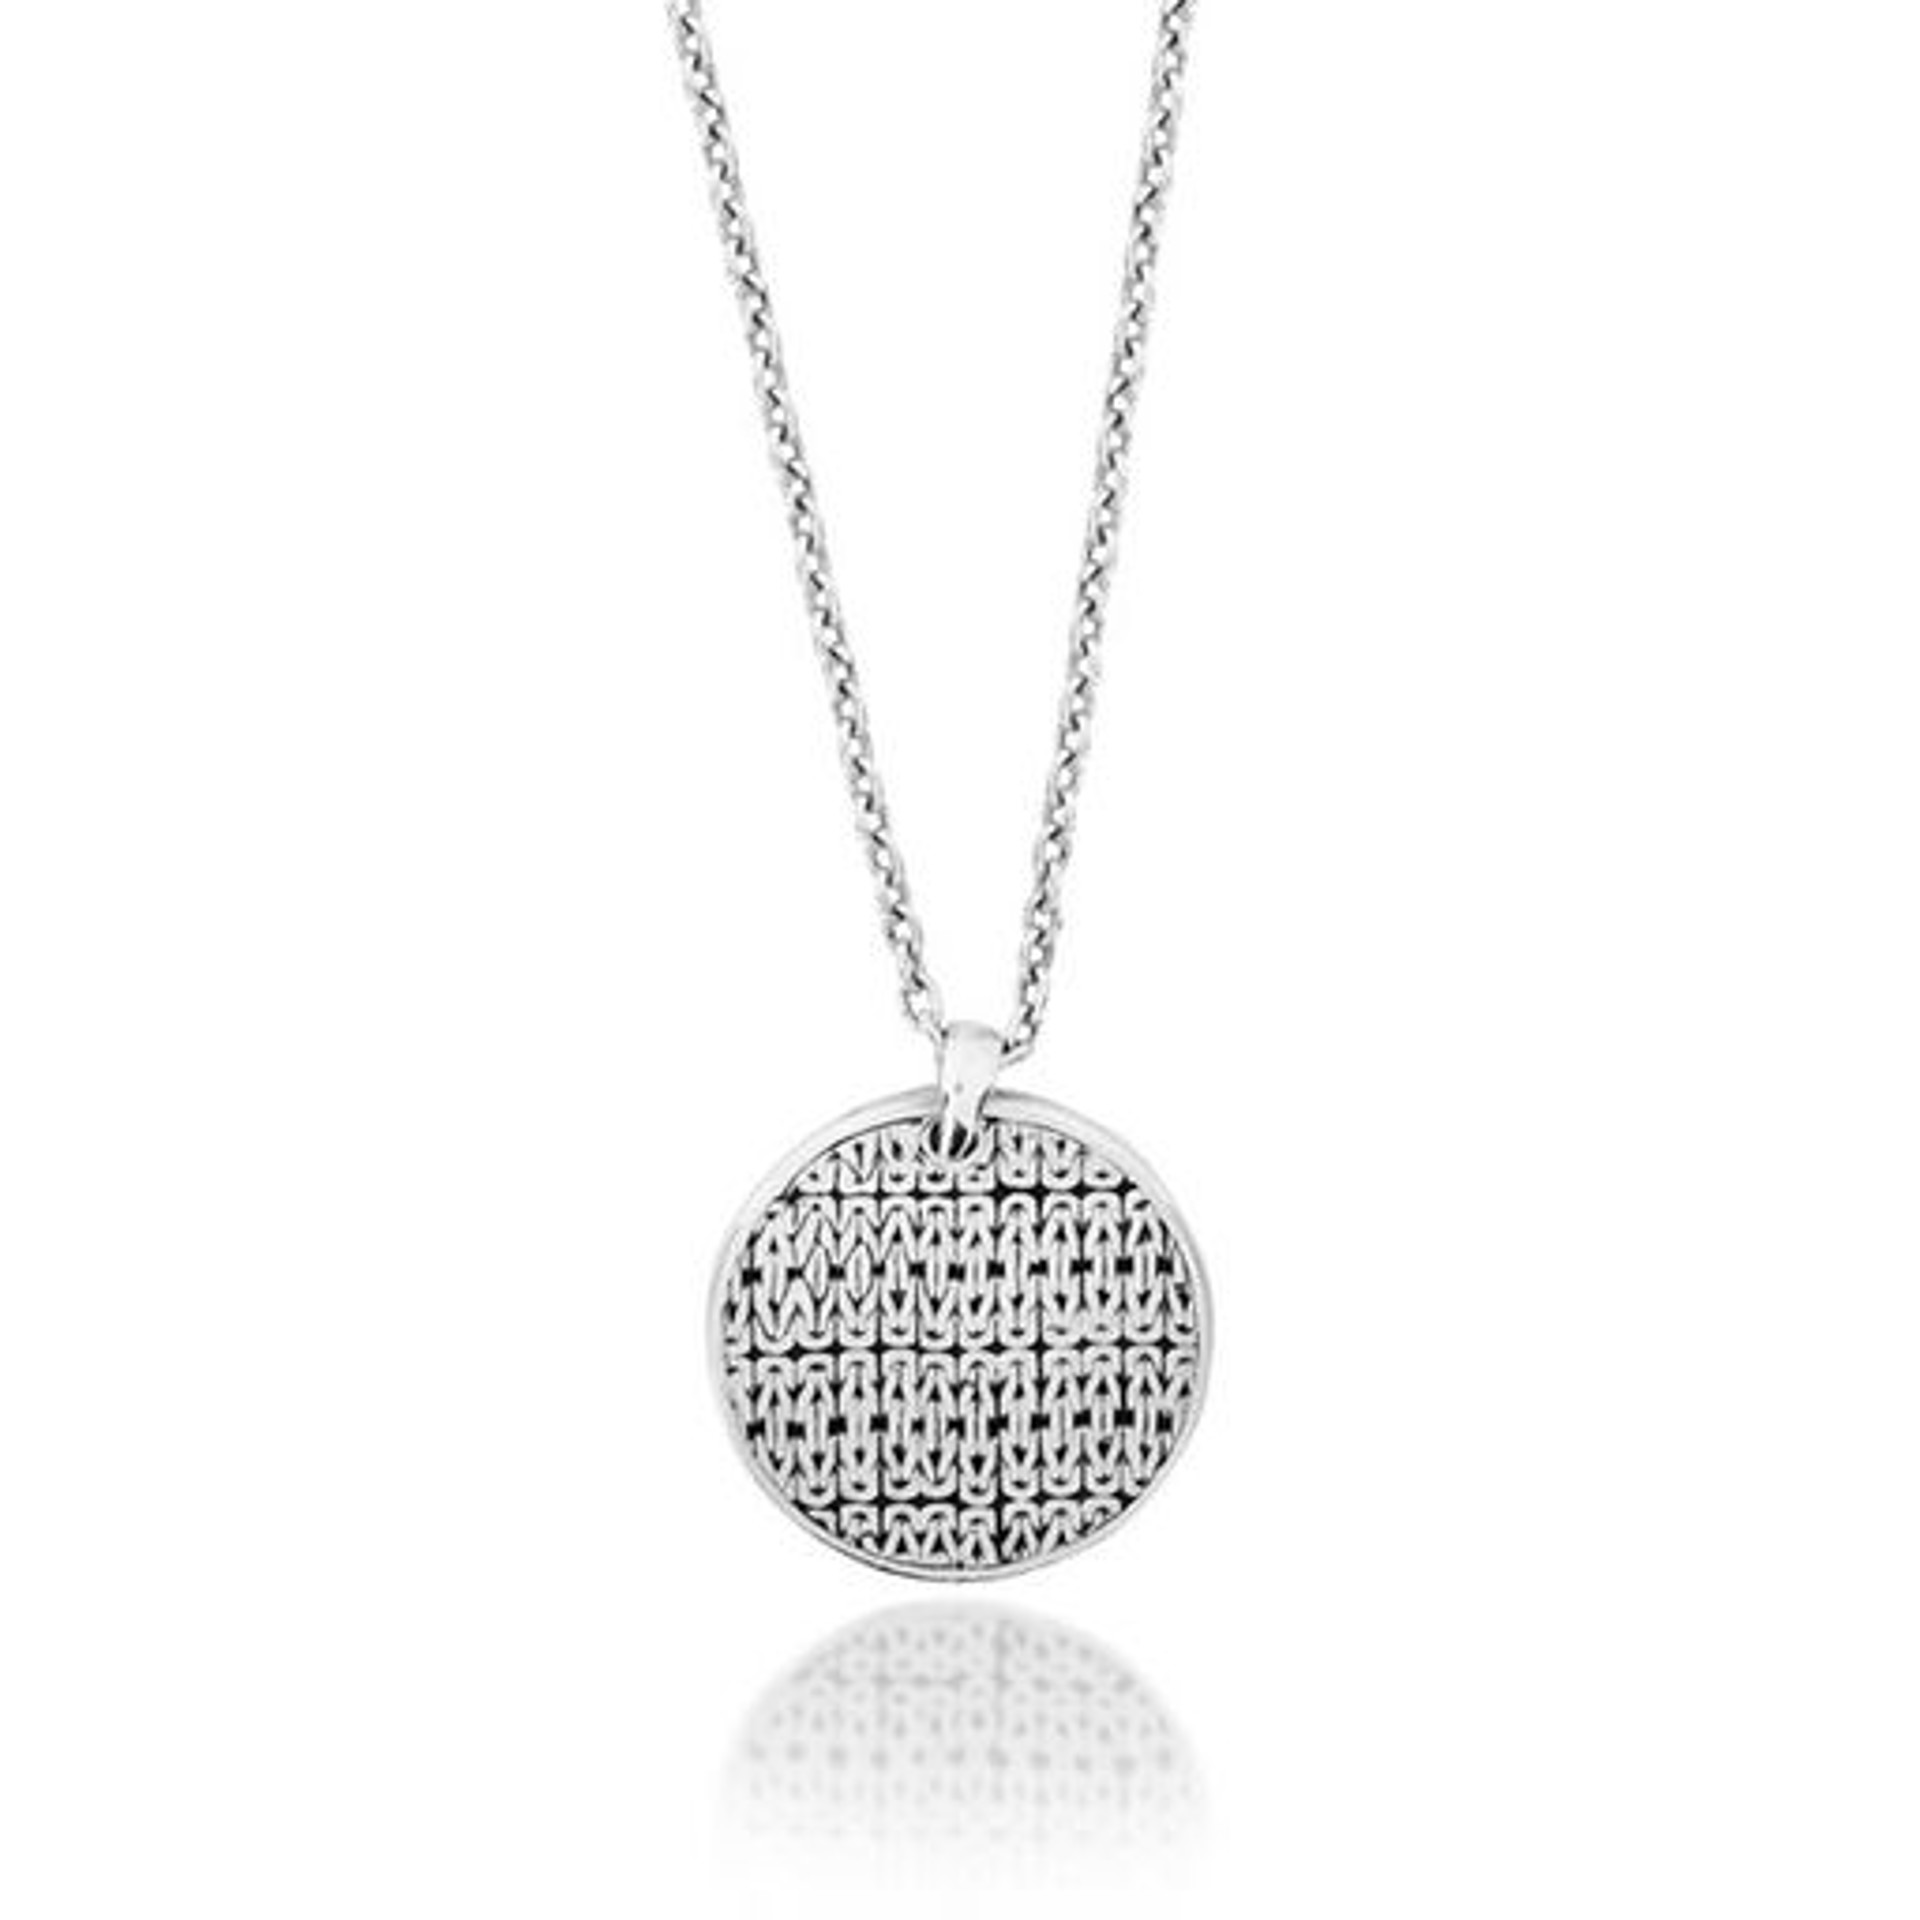 7027 Men's 1-sided Circle Weave Silver Necklace by Lois Hill